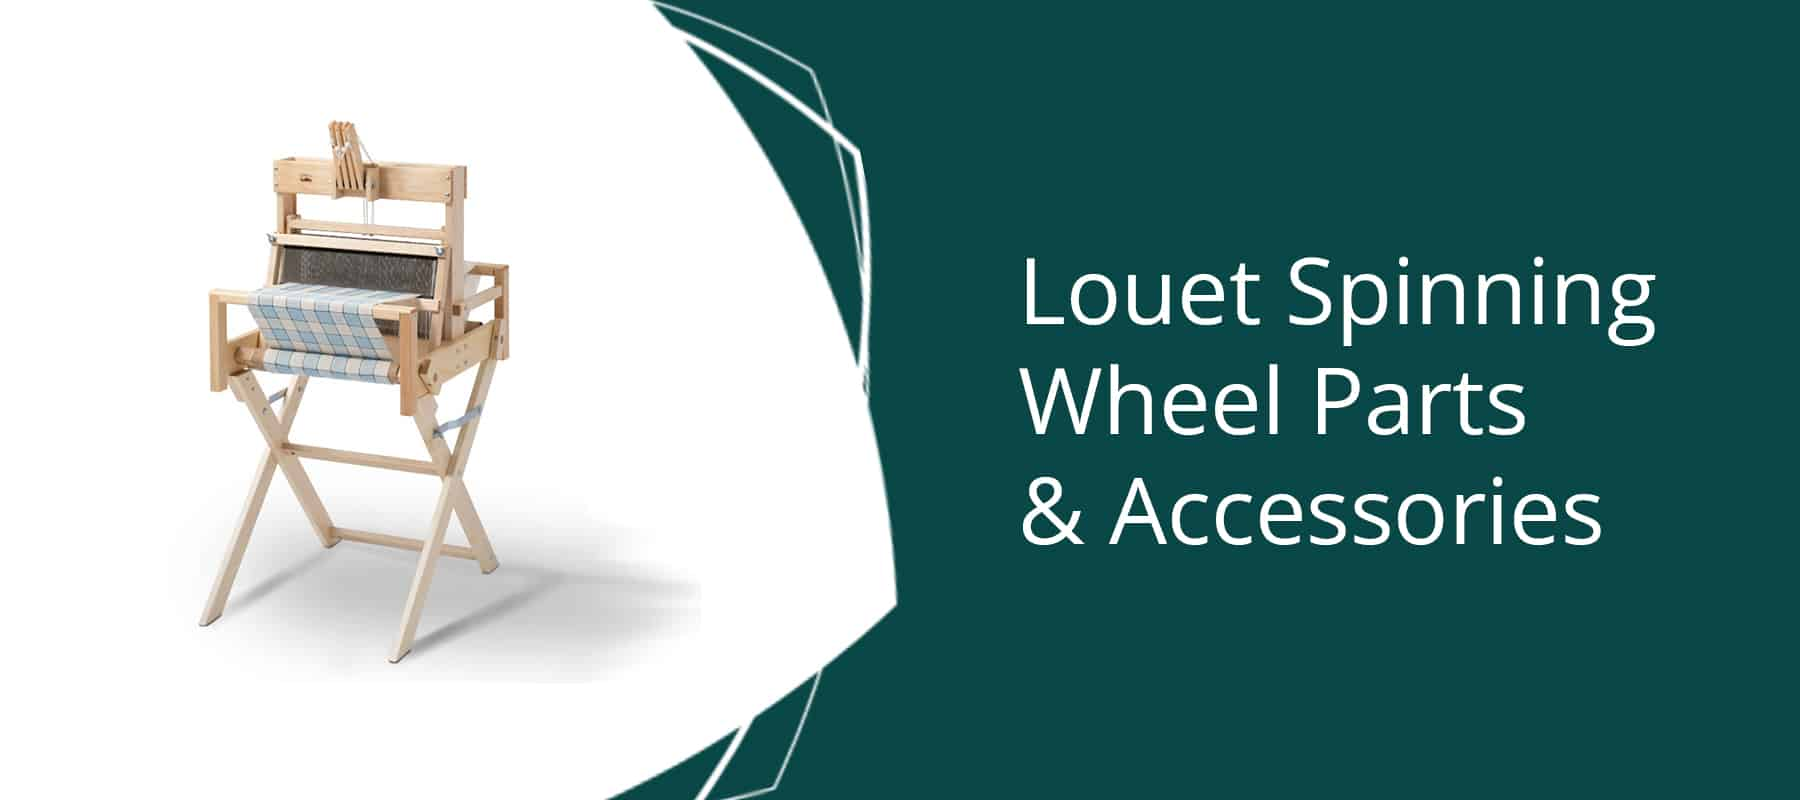 Louet Spinning Wheel Accessories and Parts - Thread Collective Australia 